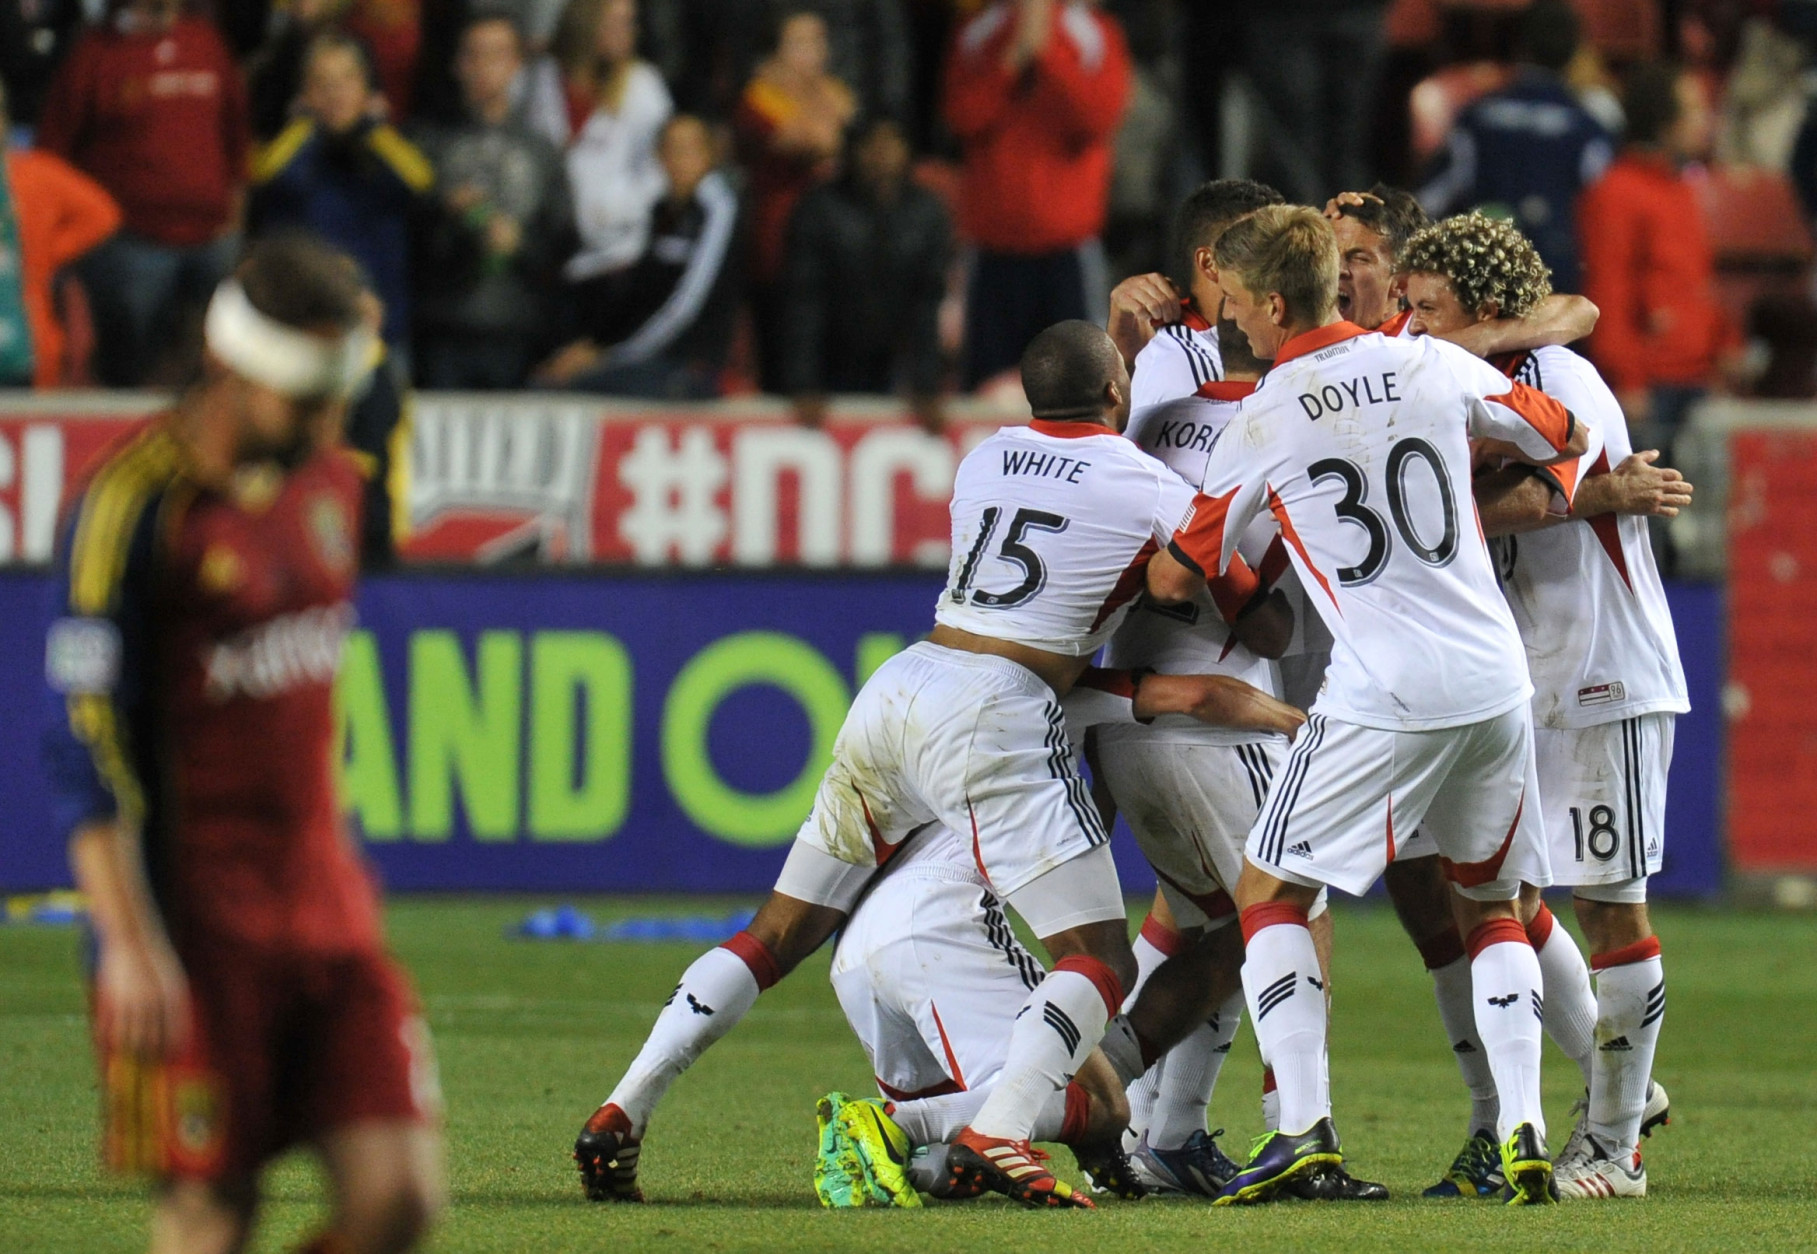 D.C. United resumes play in the CONCACAF Champions League Tuesday.